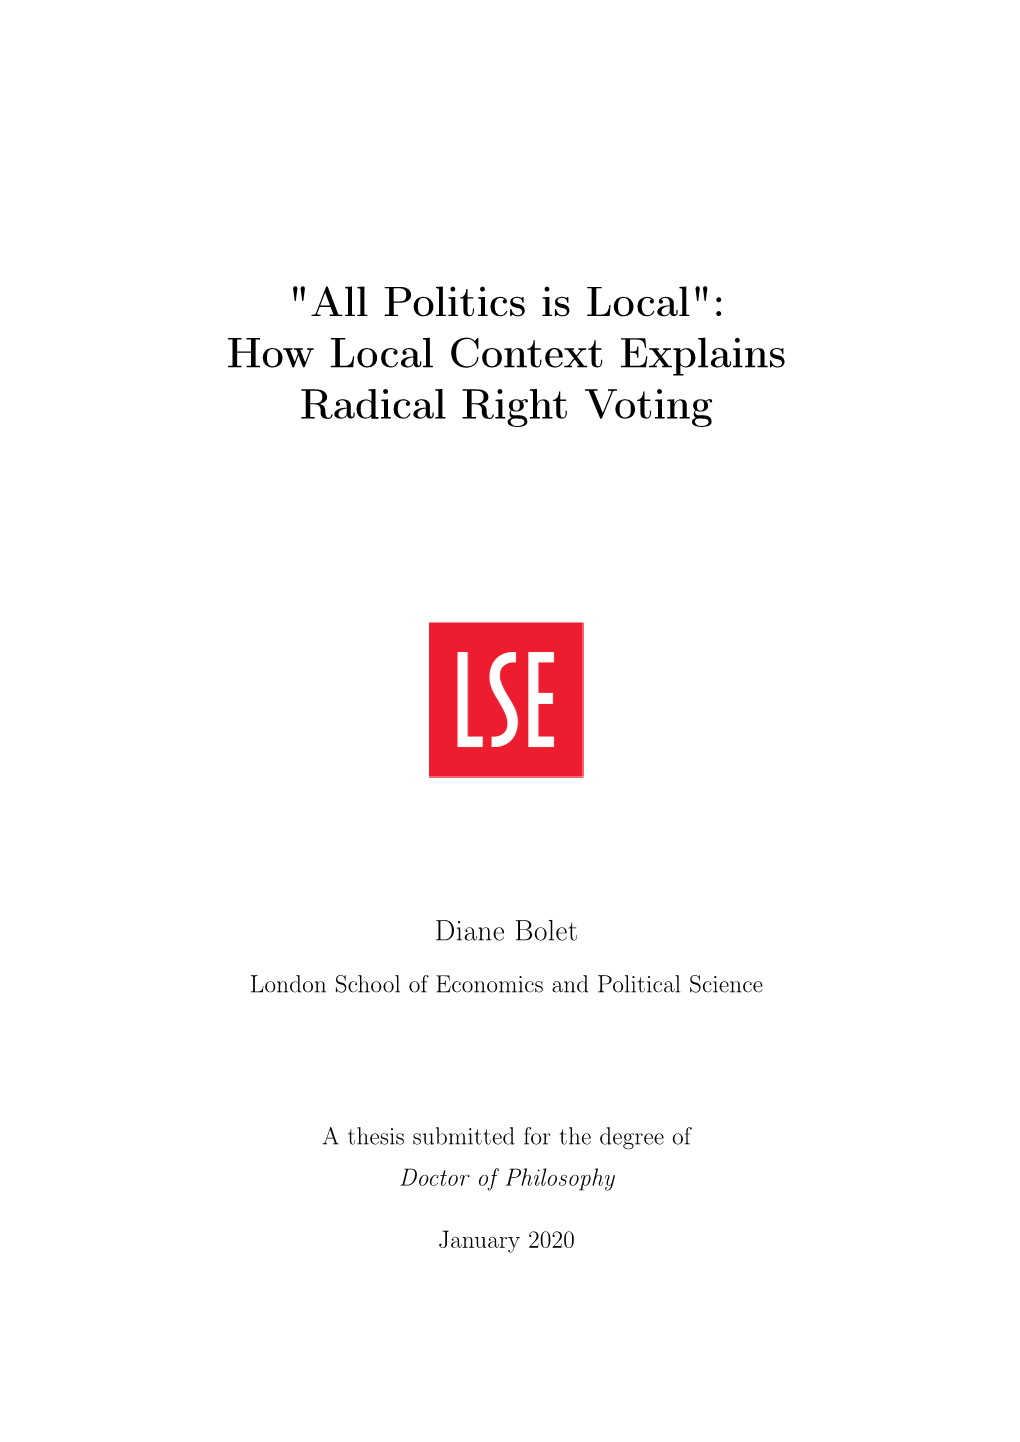 "All Politics Is Local": How Local Context Explains Radical Right Voting